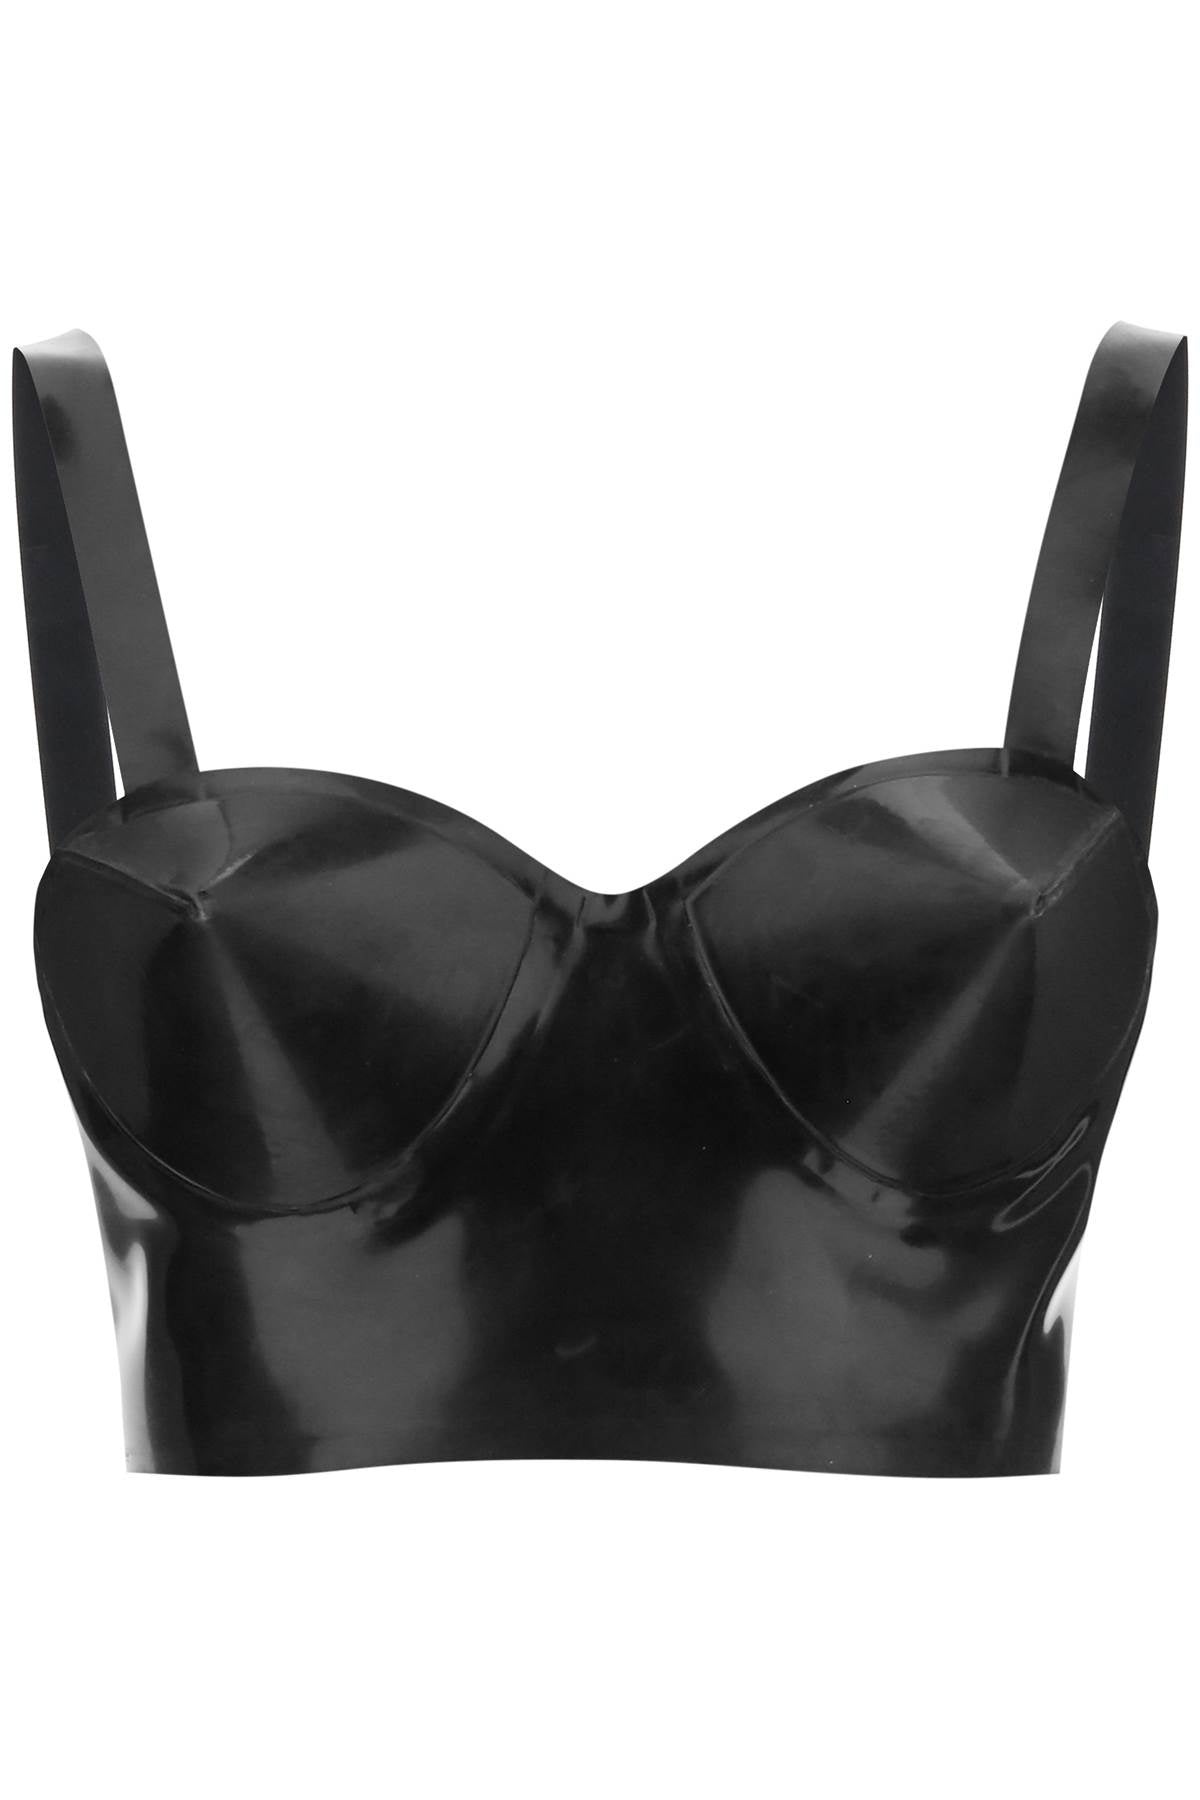 Maison Margiela Latex Top With Bullet Cups Women - 1